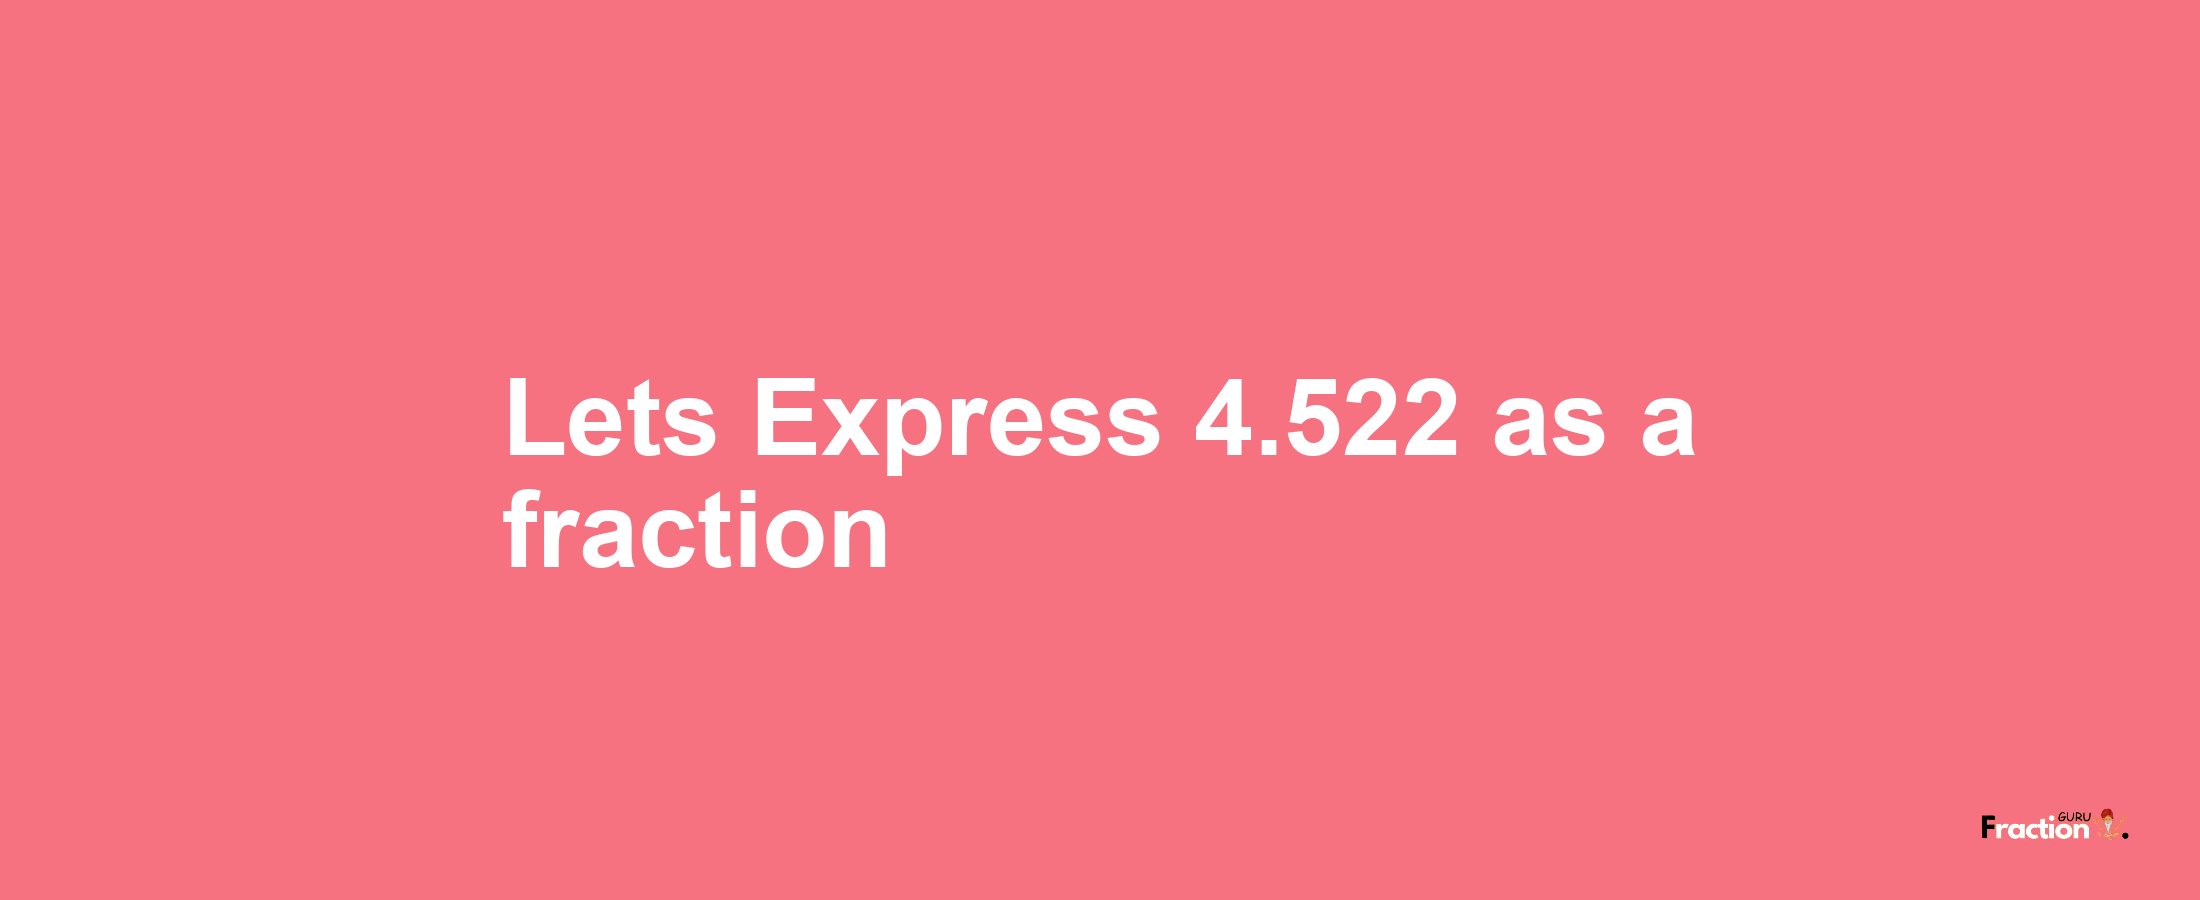 Lets Express 4.522 as afraction